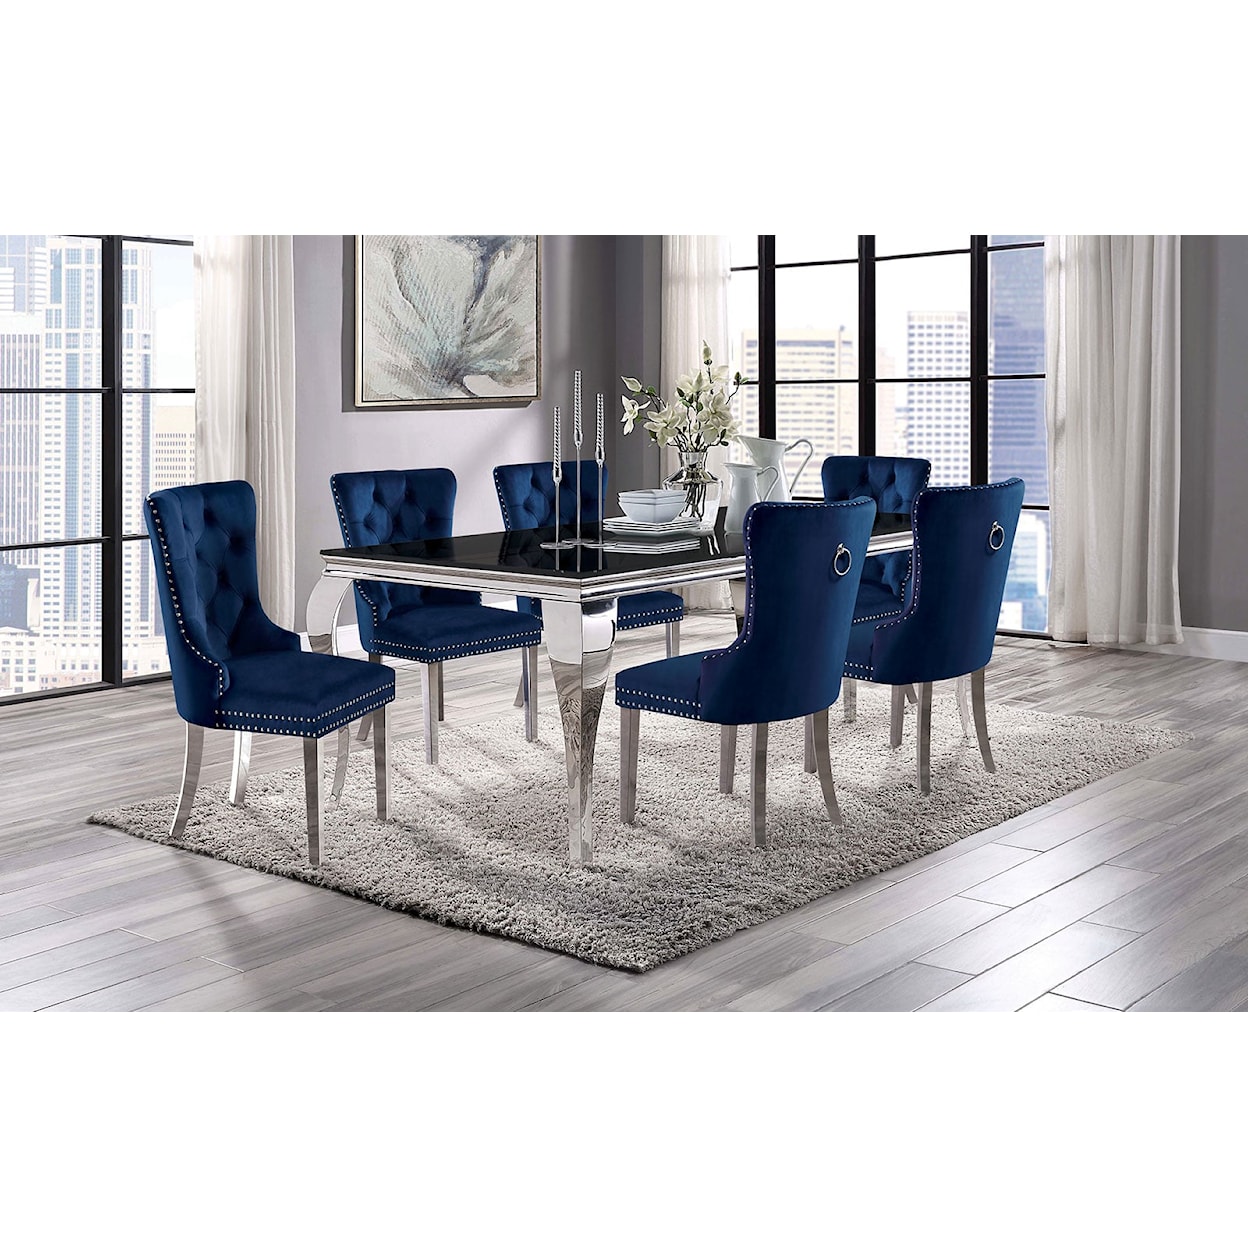 Furniture of America Neuveville 7-Piece Dining Set with Navy Chairs